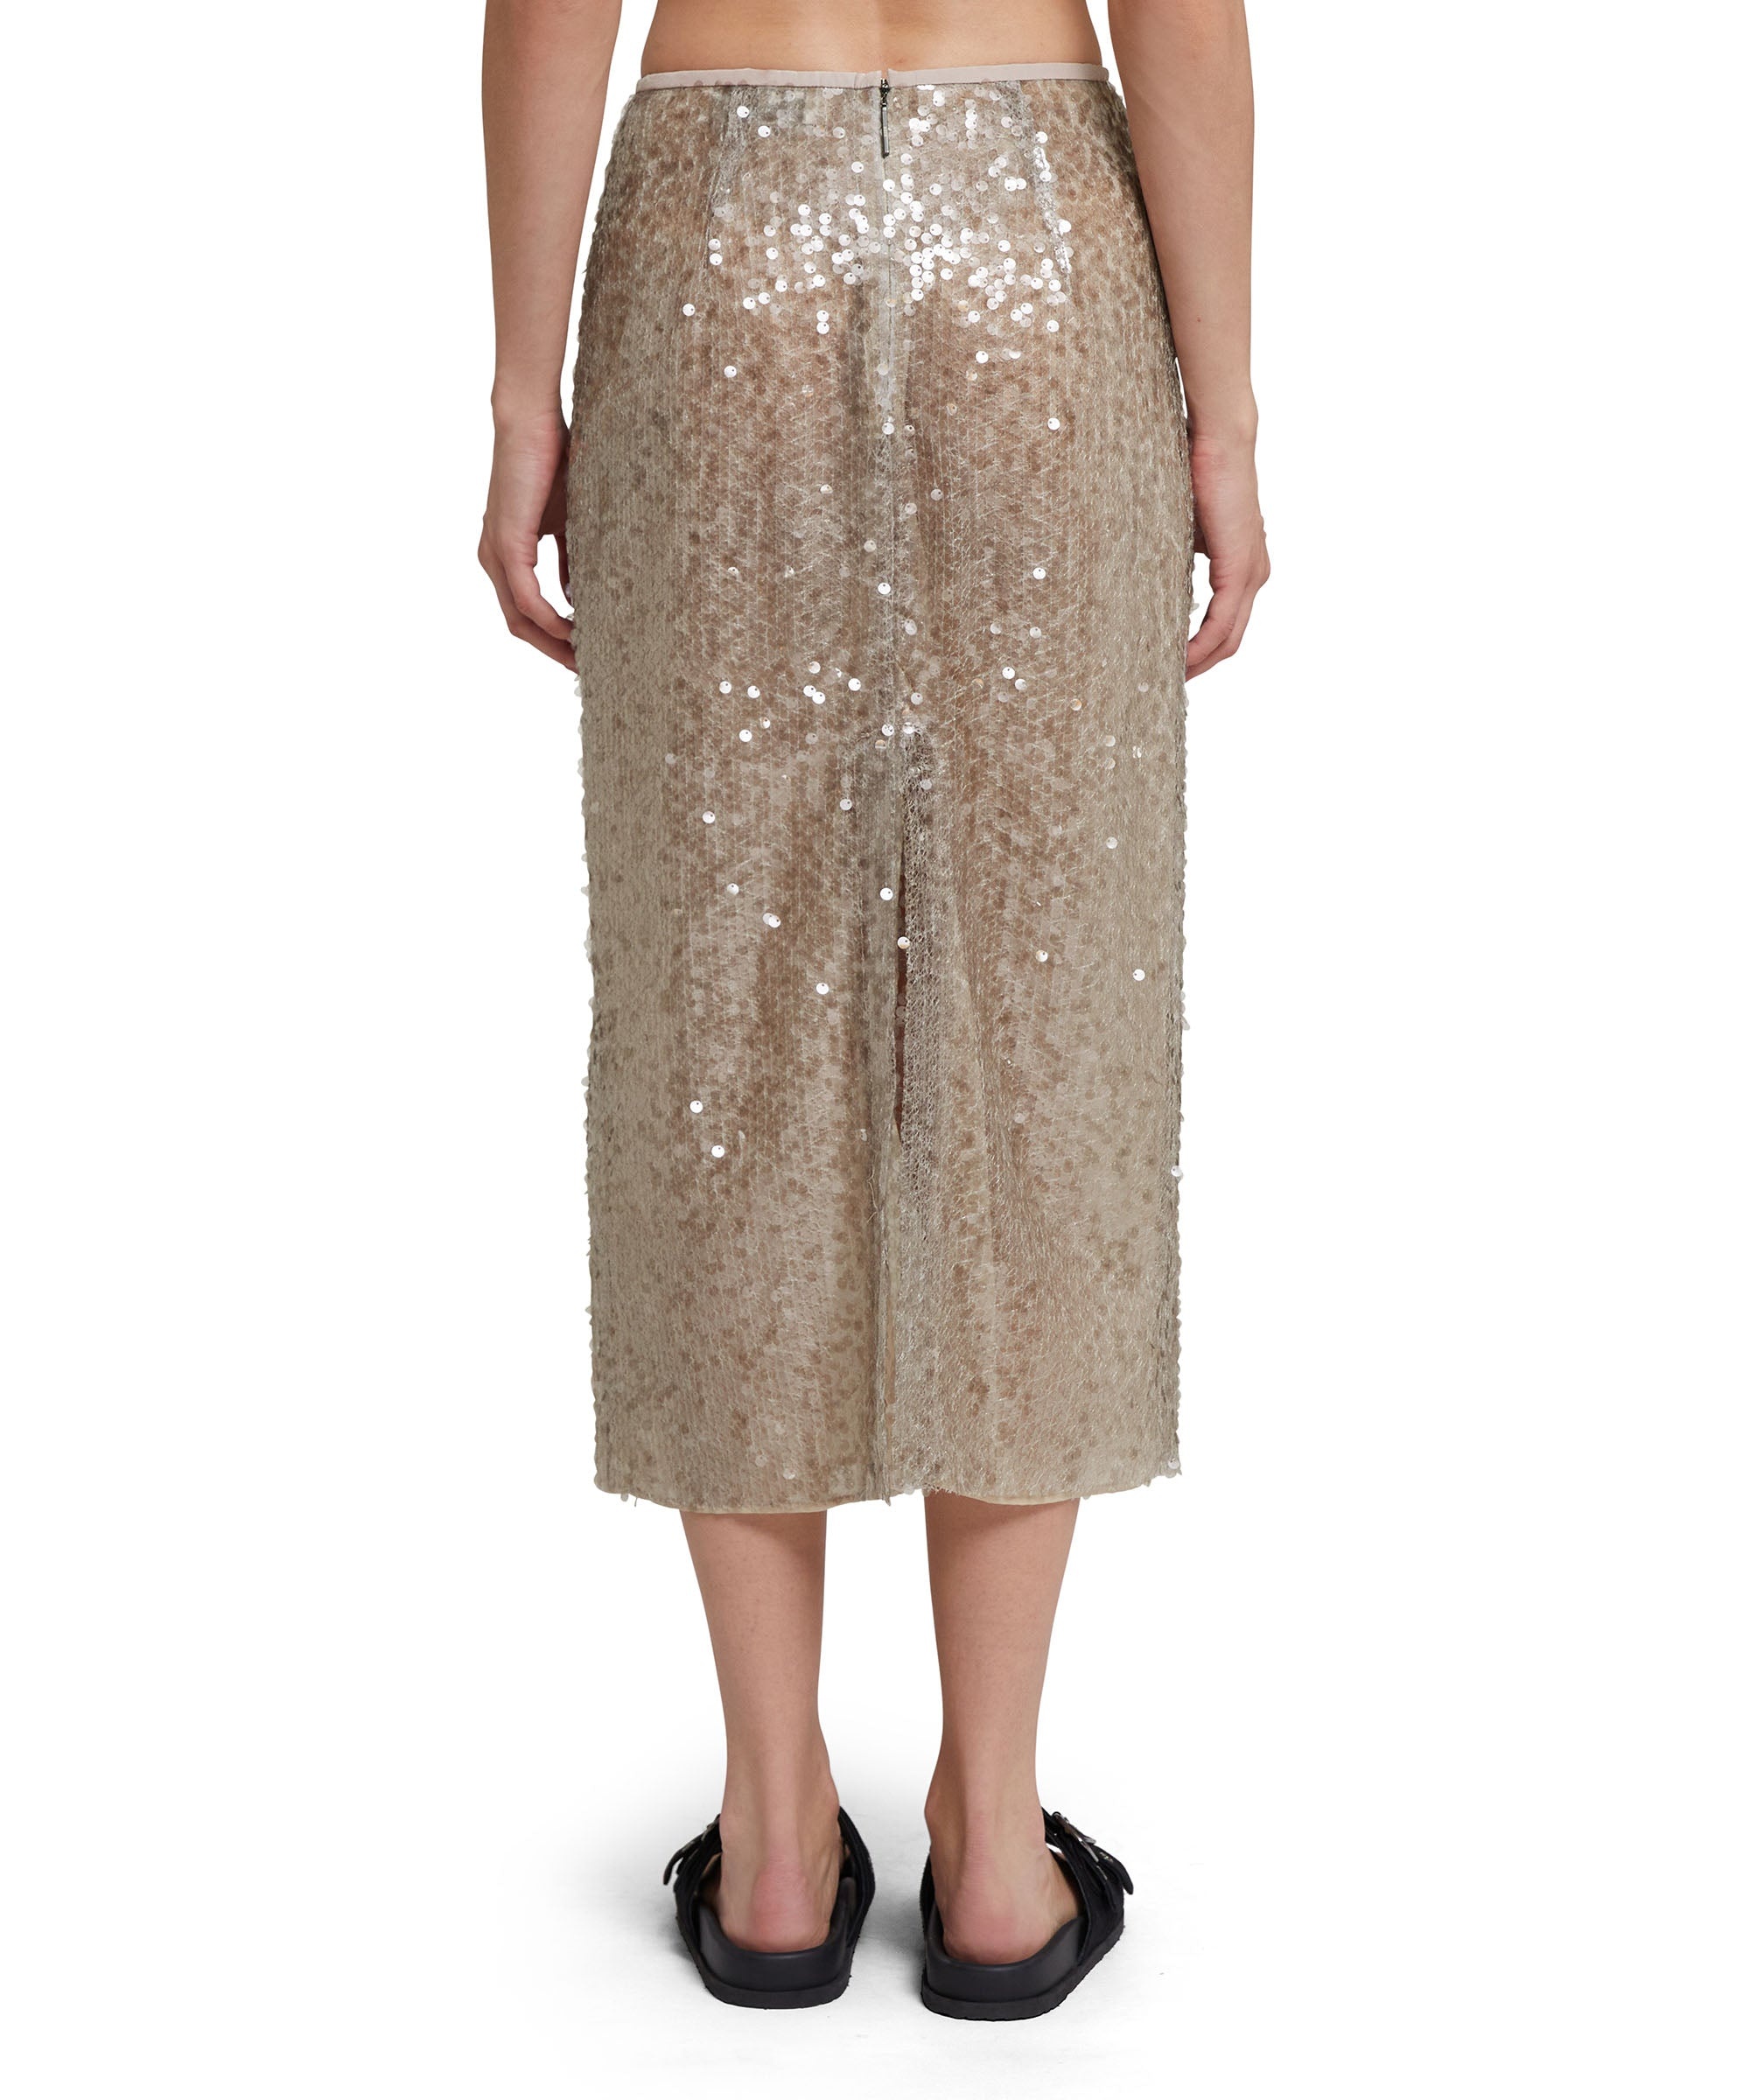 Midi dress with sequined fabric - 3